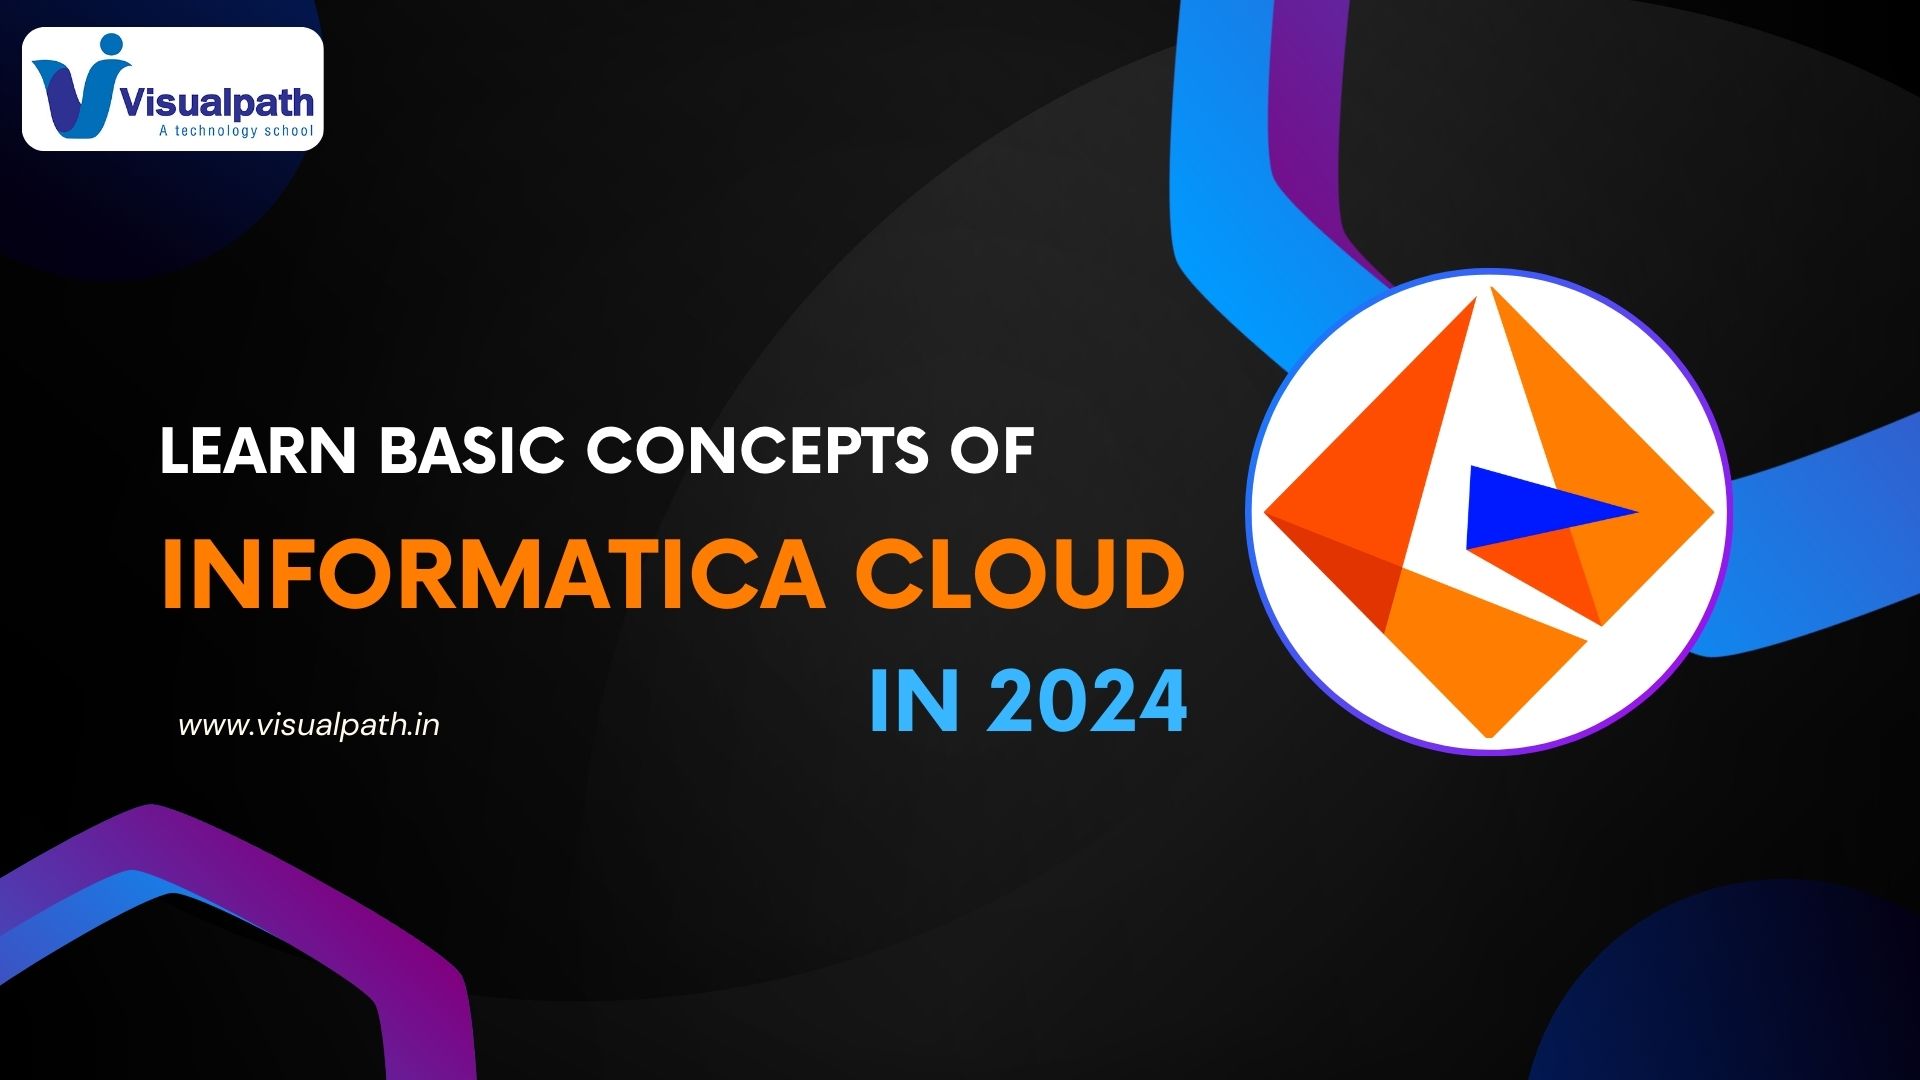 Learn Basic Concepts of Informatica Cloud in 2024